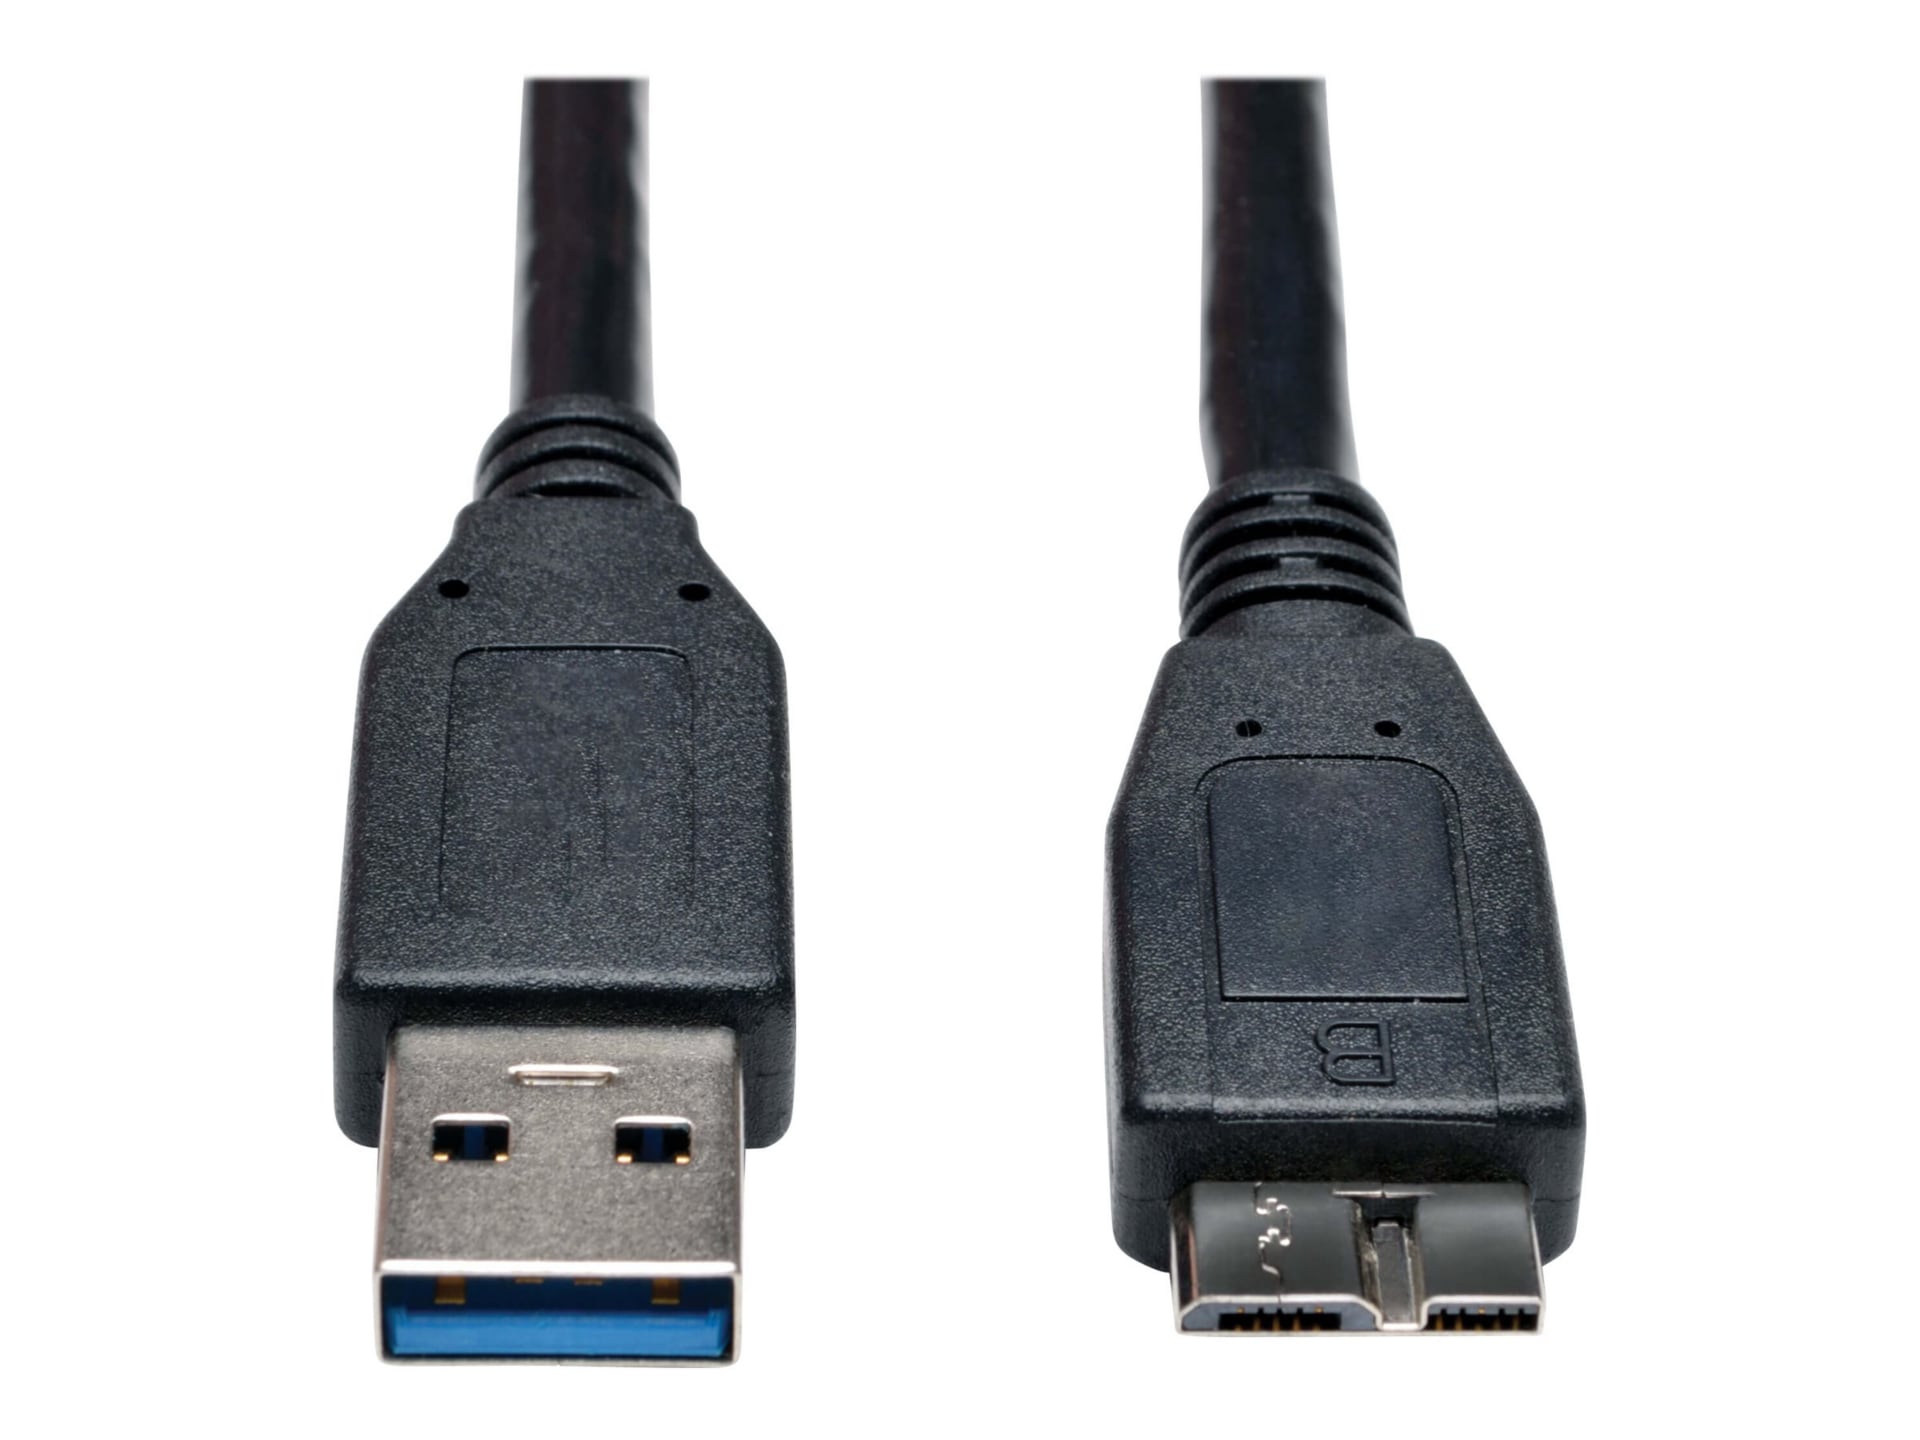 Eaton Tripp Lite Series USB 3.0 SuperSpeed Device Cable (A to Micro-B M/M) Black, 3 ft. (0.91 m) - USB cable - Micro-USB